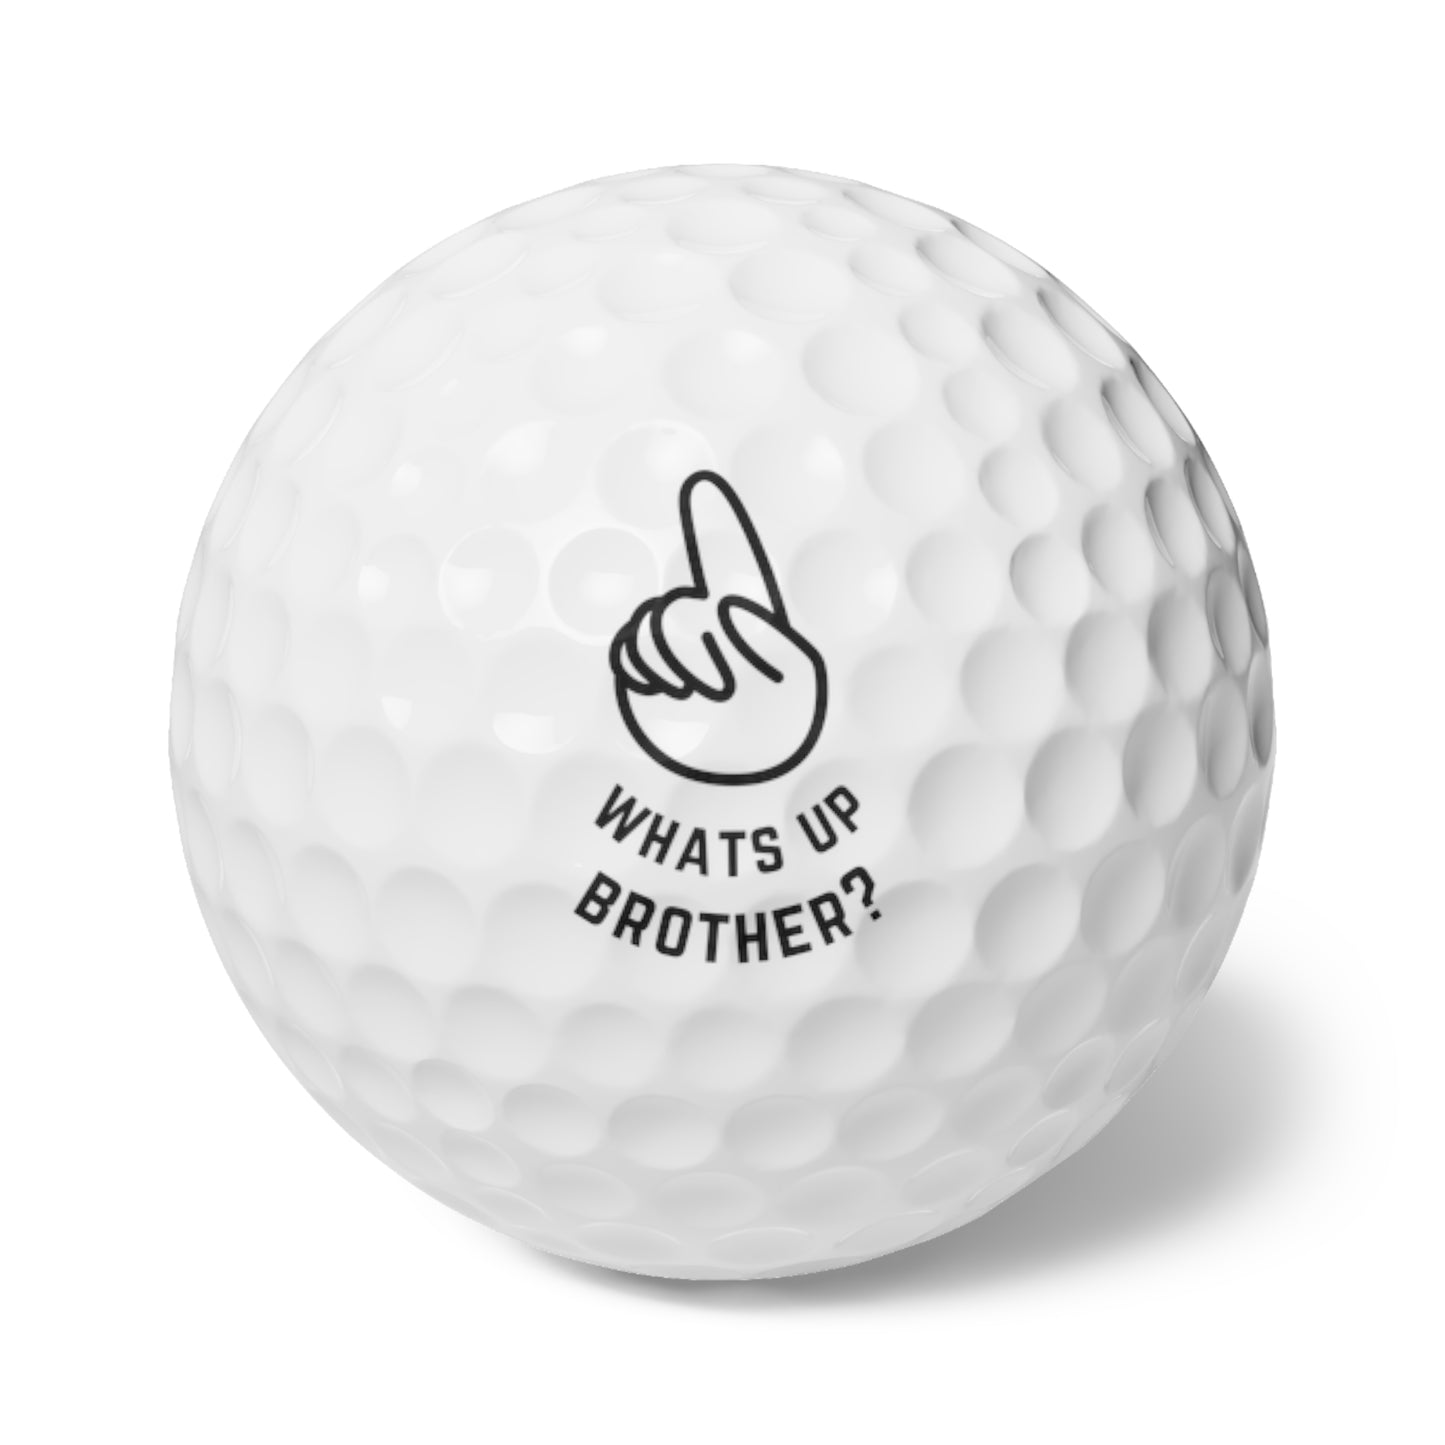 “Whats up brother?” Golf Balls, 6pcs